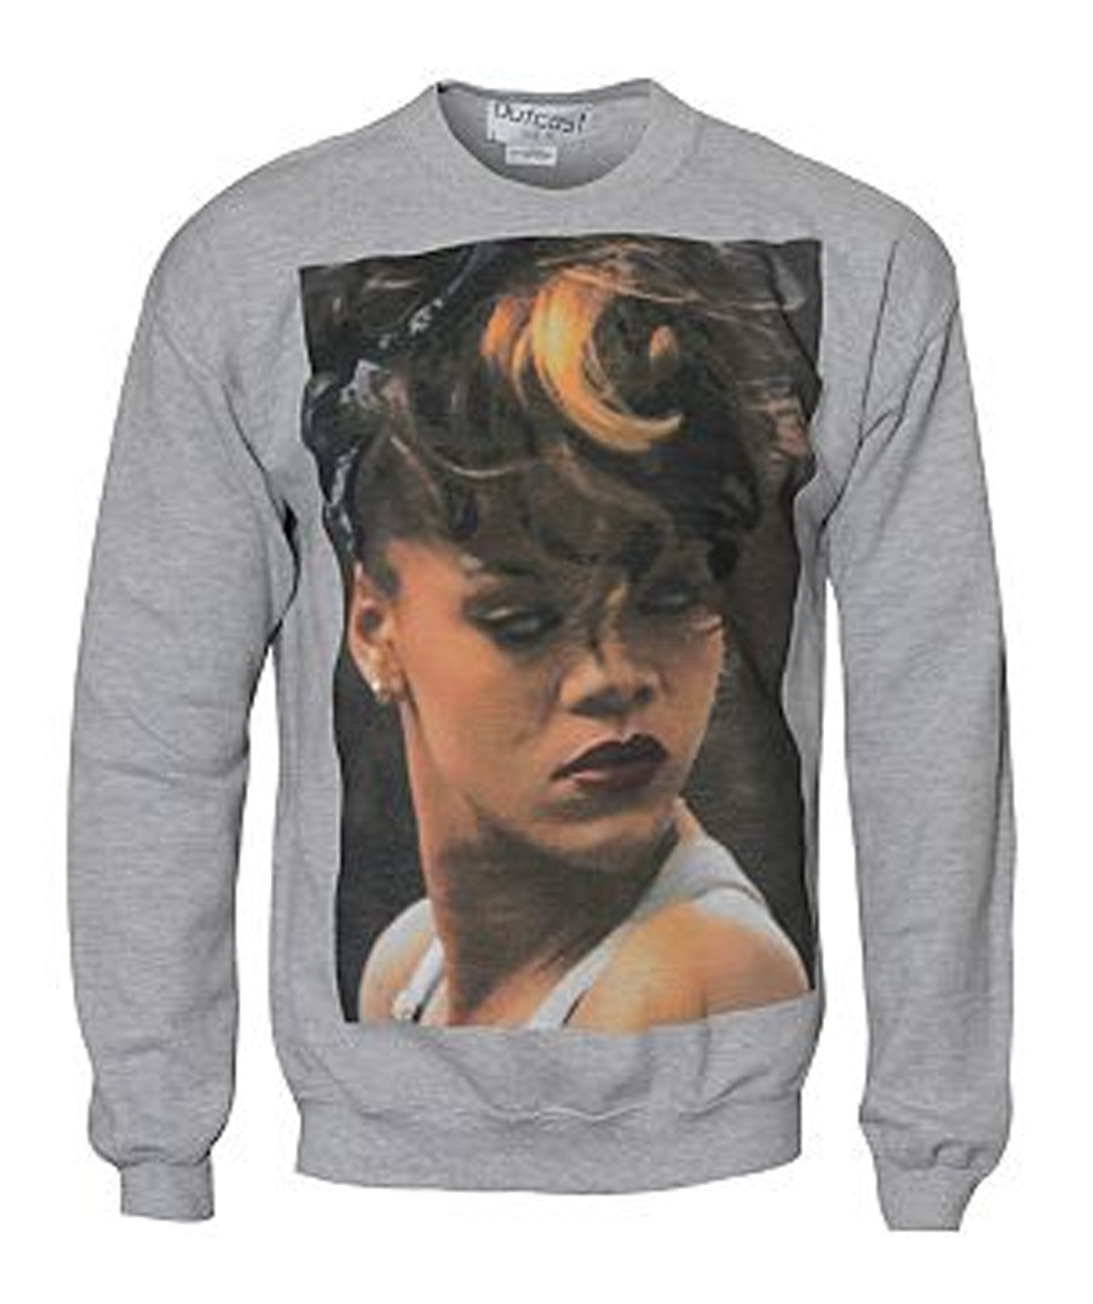 Rihanna Outcast Celeb Icon Sweater available from Bank Fashion currently on sale for £19.00 (limited time only). Click HERE to view. International delivery welcome :)